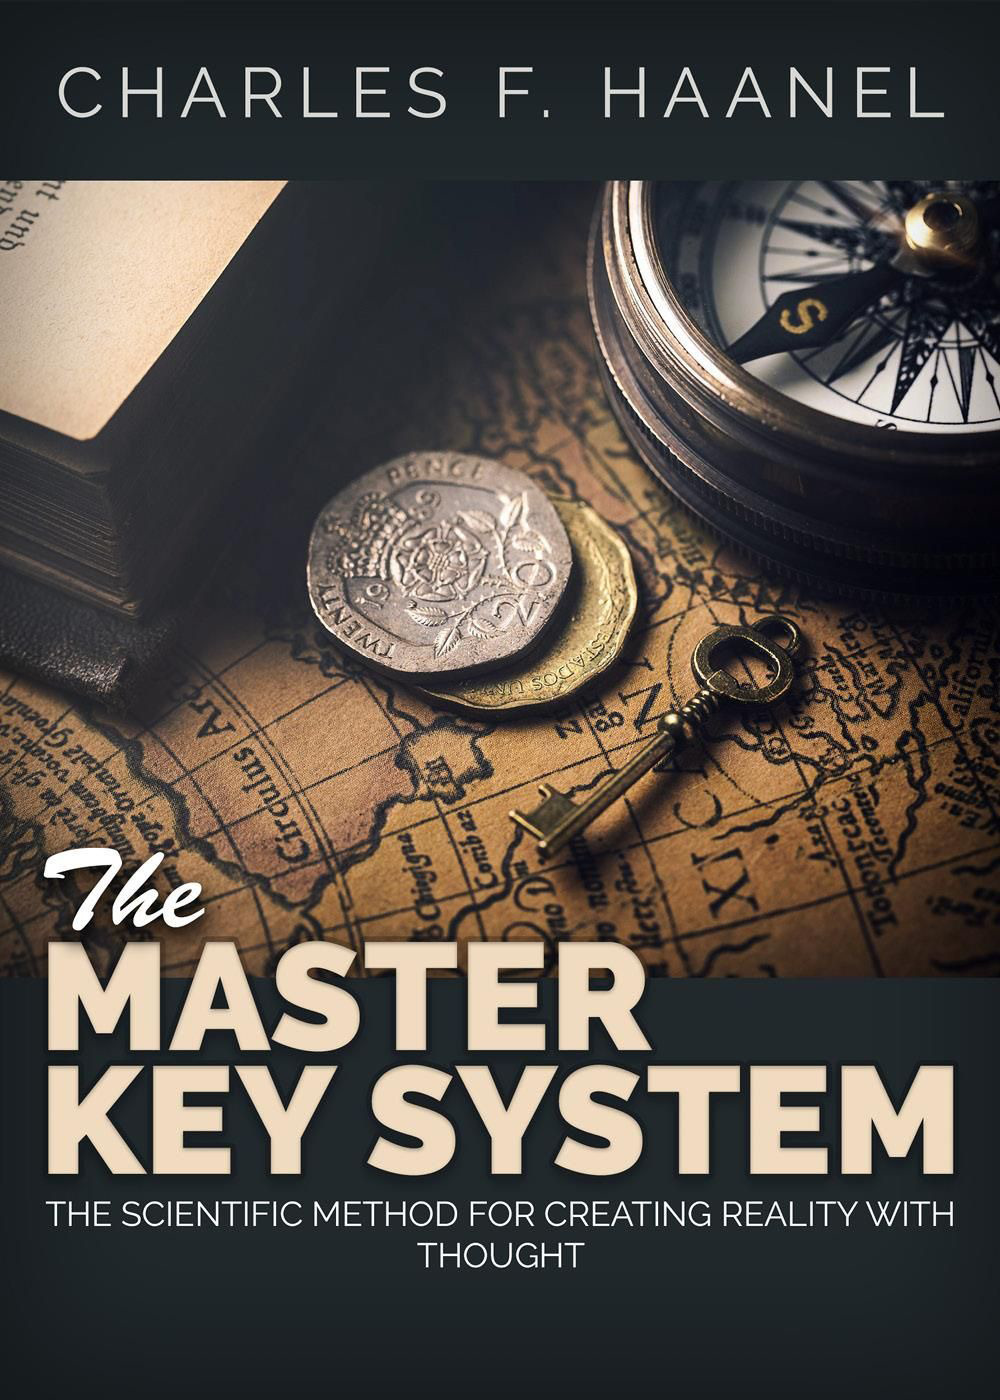 The master key system. The scientific method for creating reality with thought